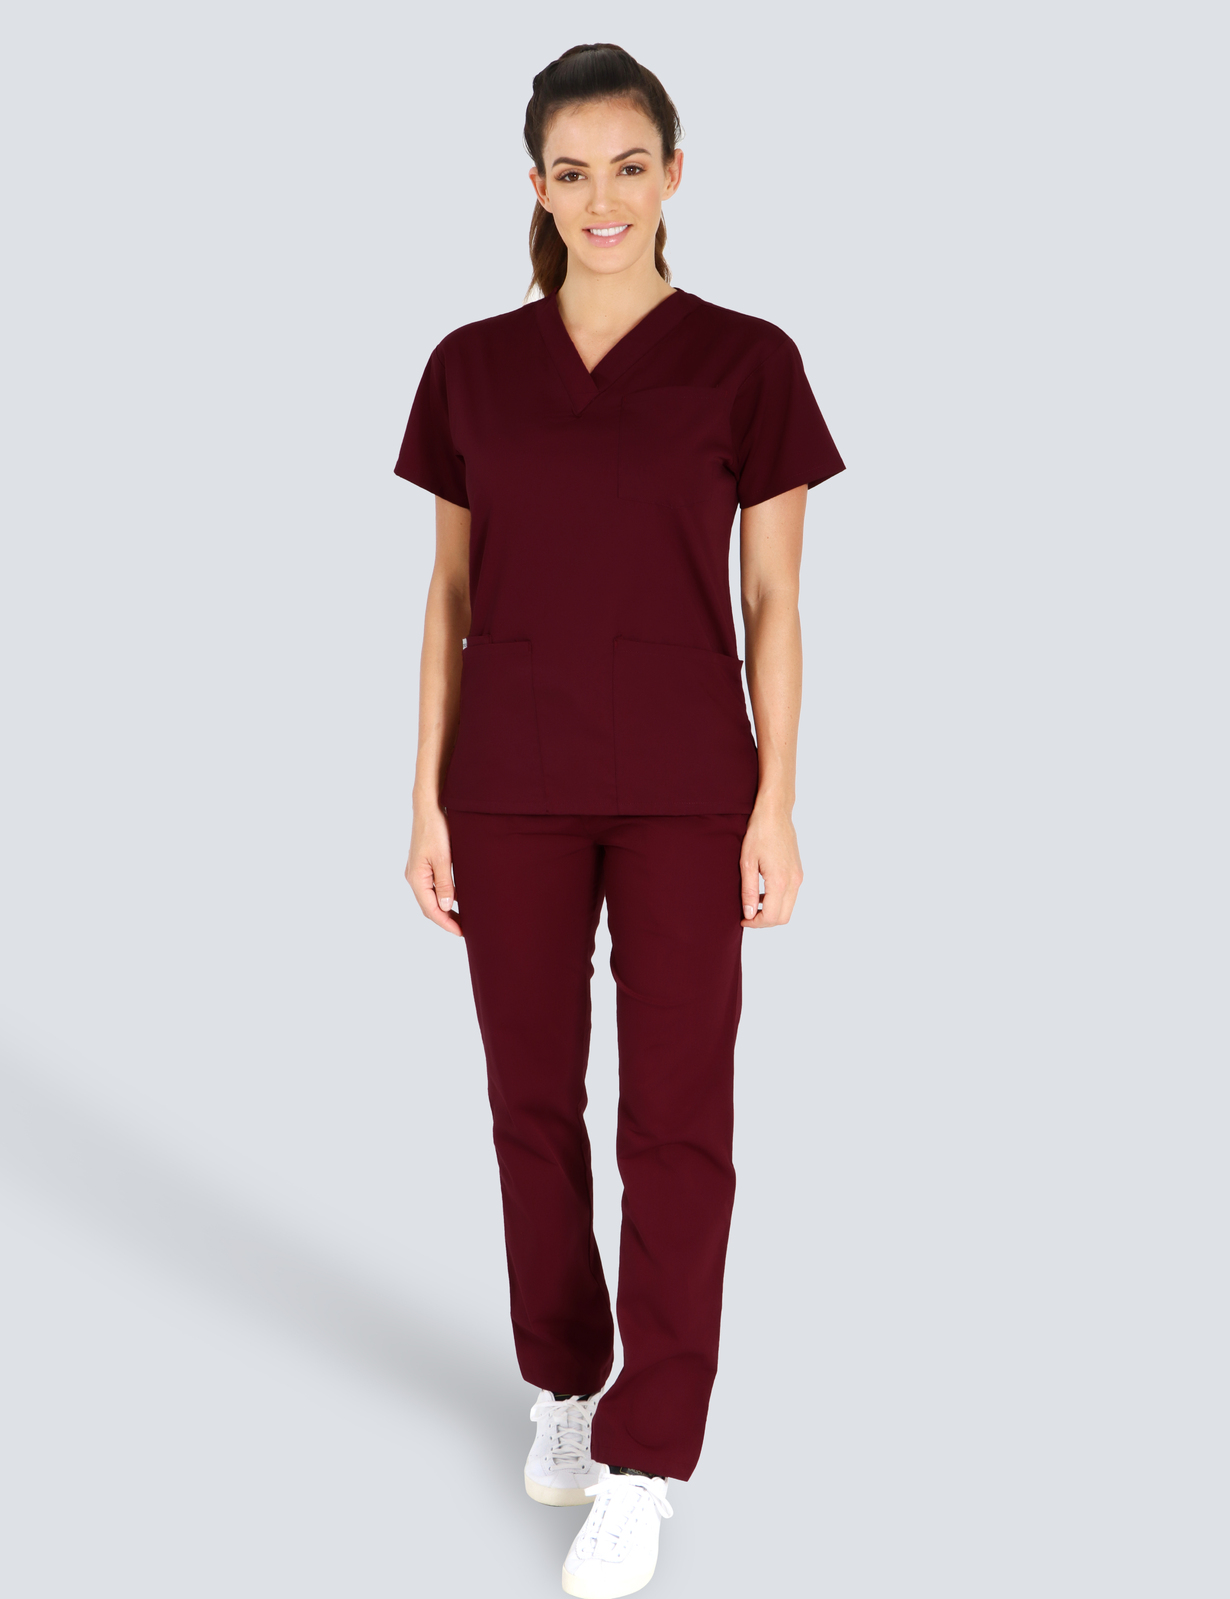 Gympie Hospital - nursing Practitioner (4 Pocket Scrub Top and Cargo Pants in Burgundy incl Logos)